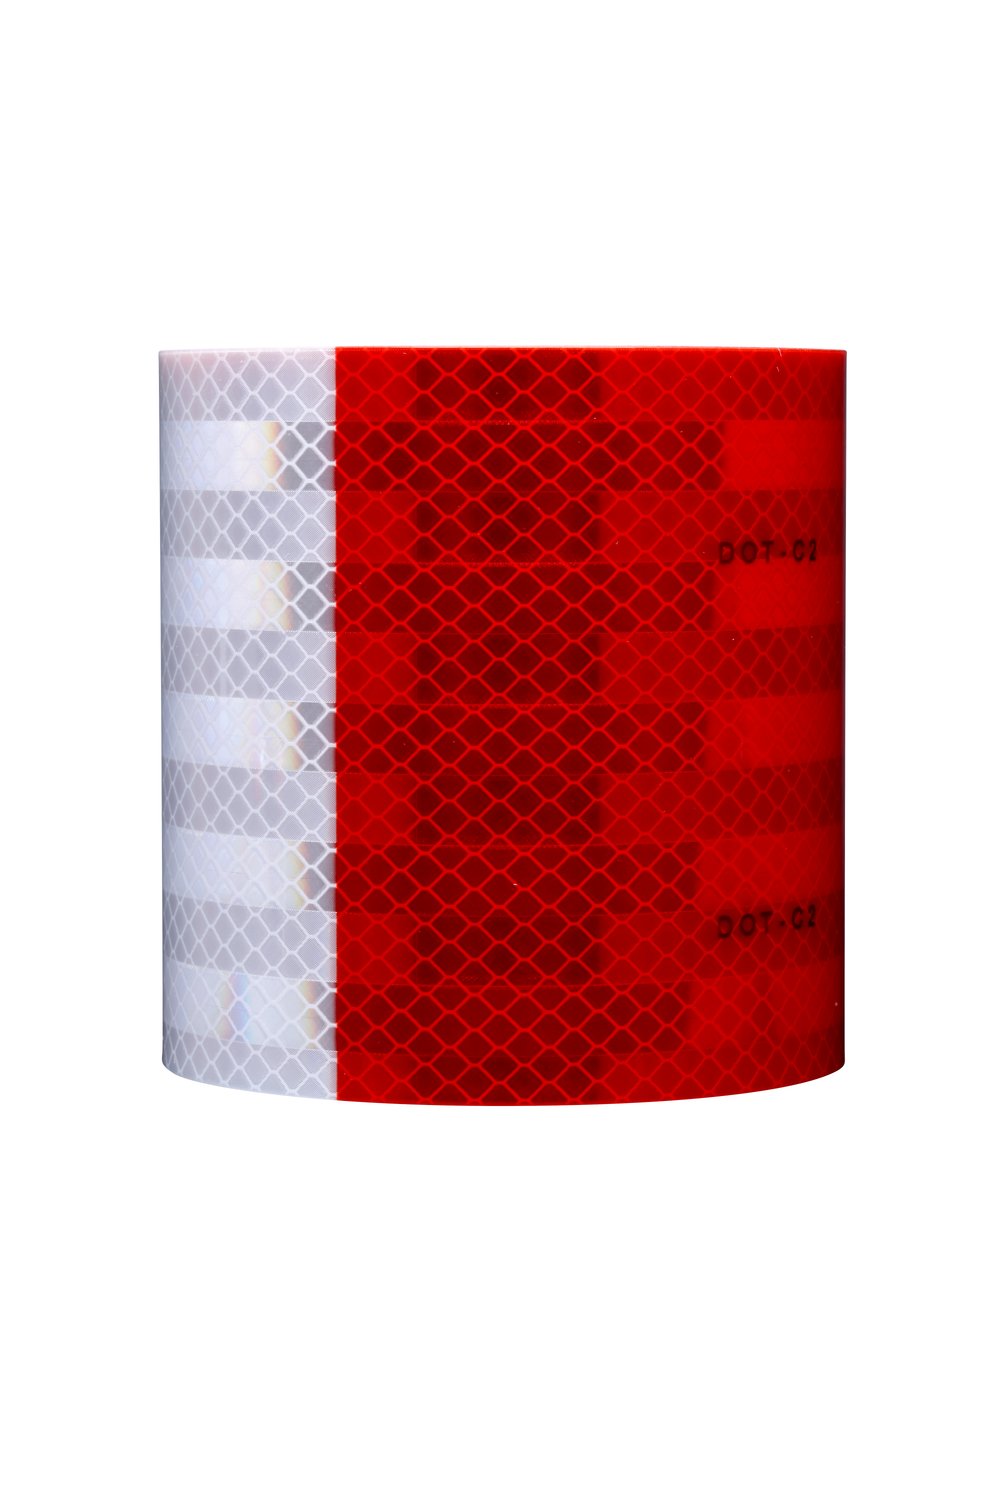 7010304507 - 3M Diamond Grade Conspicuity Markings 983-32 ES, Red/White, Wabash
Logo, MFG Only, 2 in x 200 yd